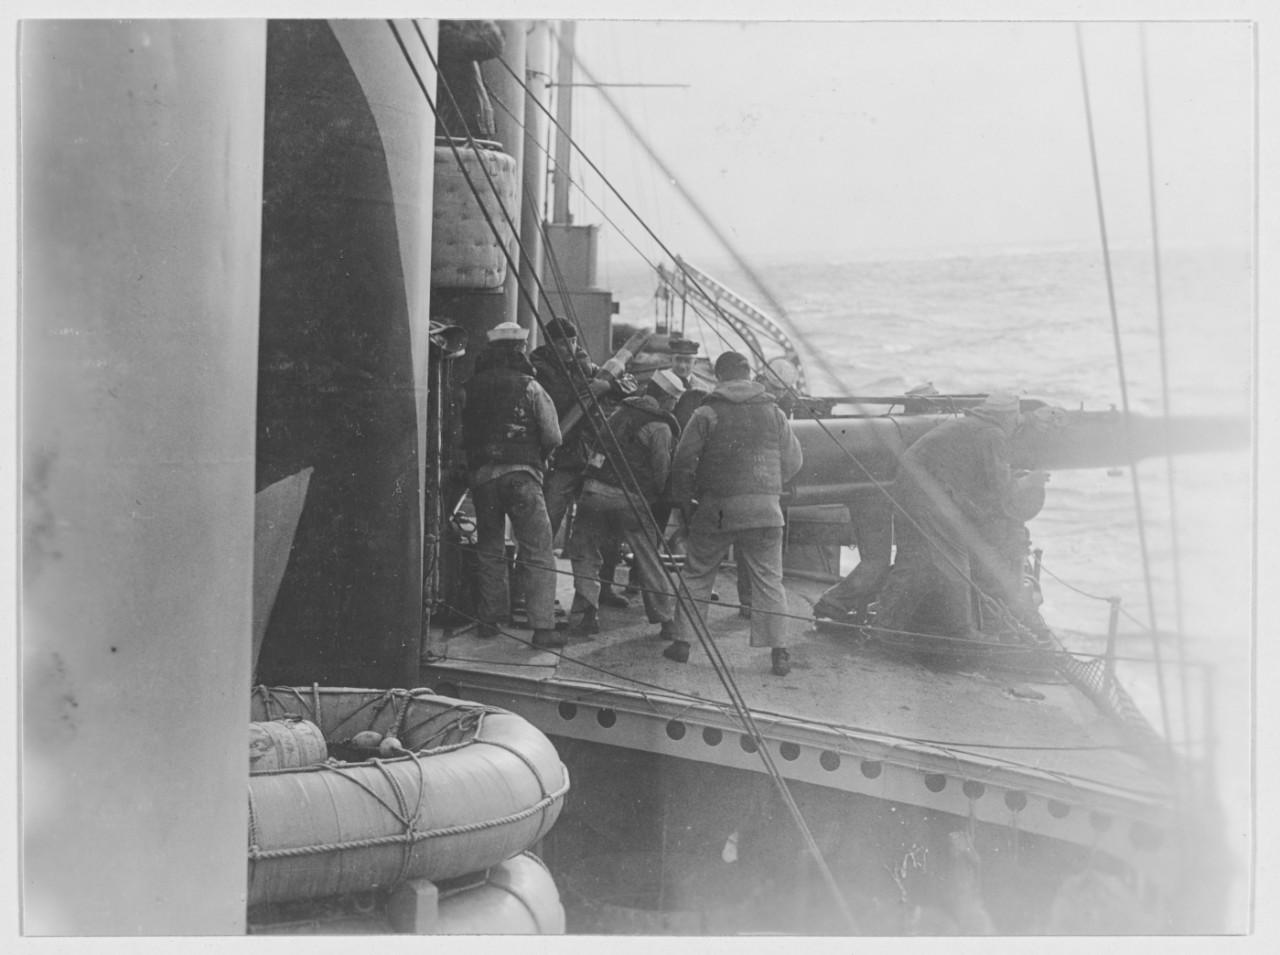 View of the gun crew at practice on USS LITTLE, November 24, 1918